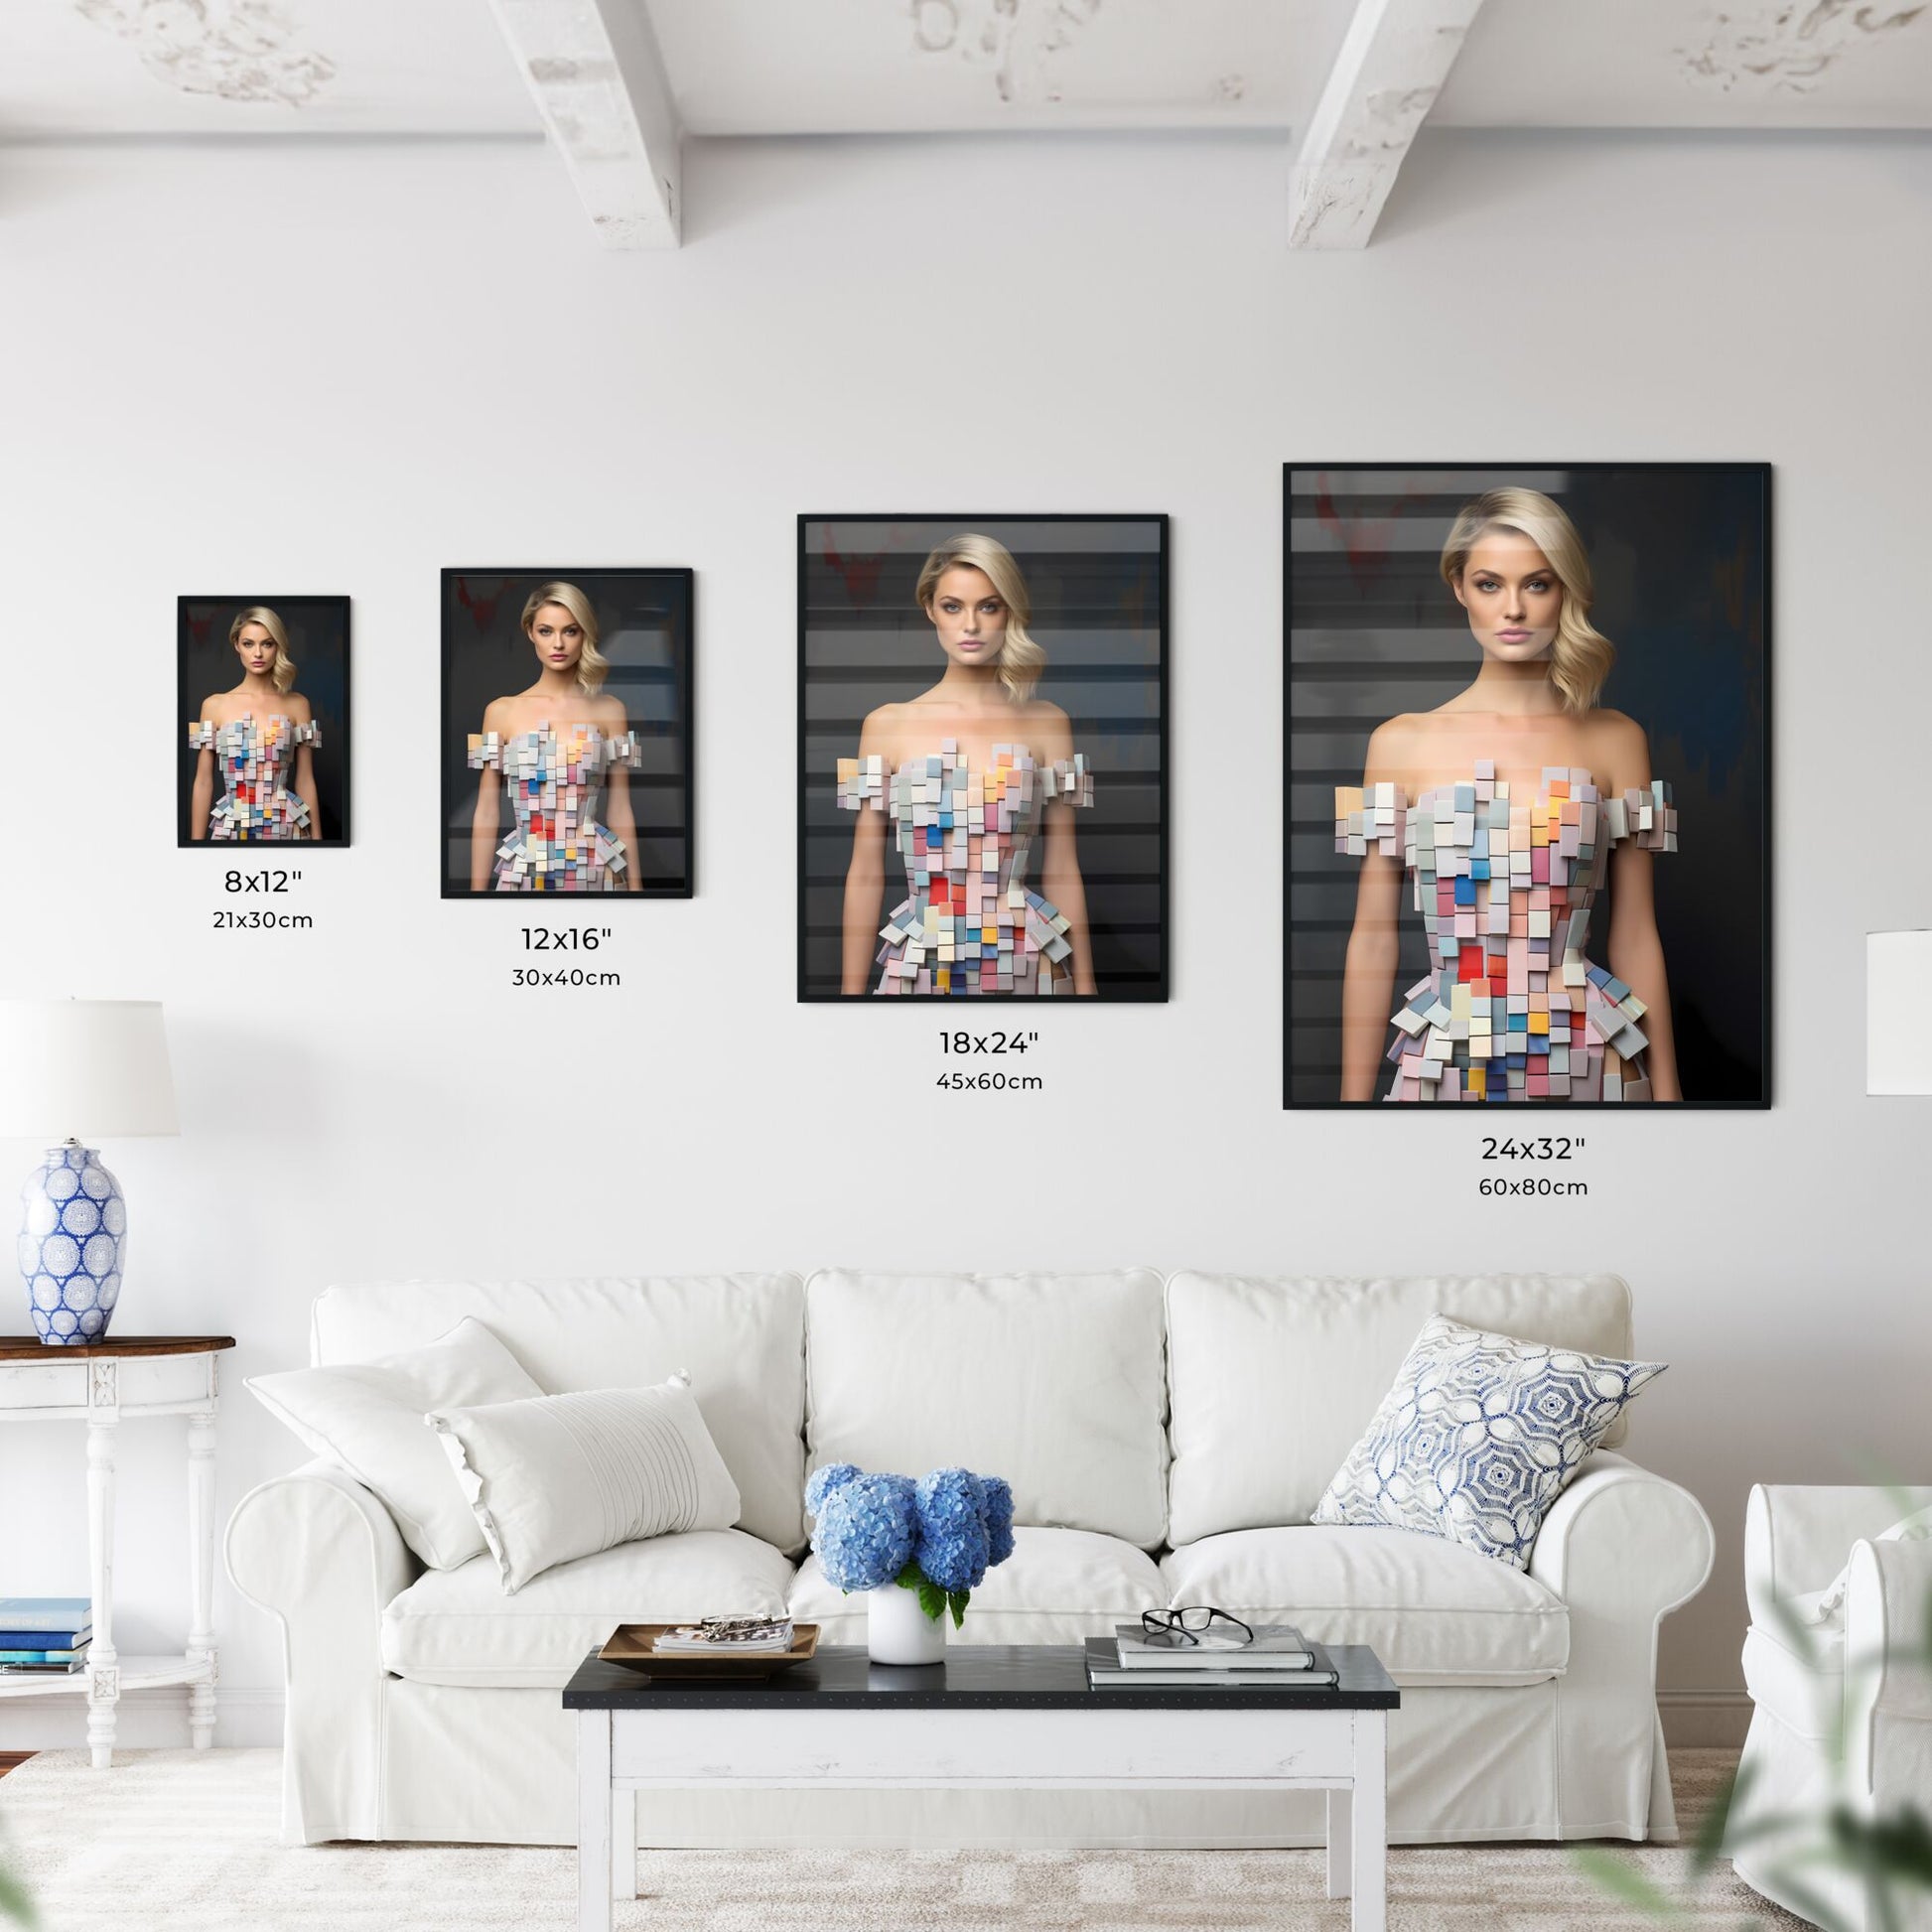 Woman Wearing A Dress Made Of Squares Art Print Default Title